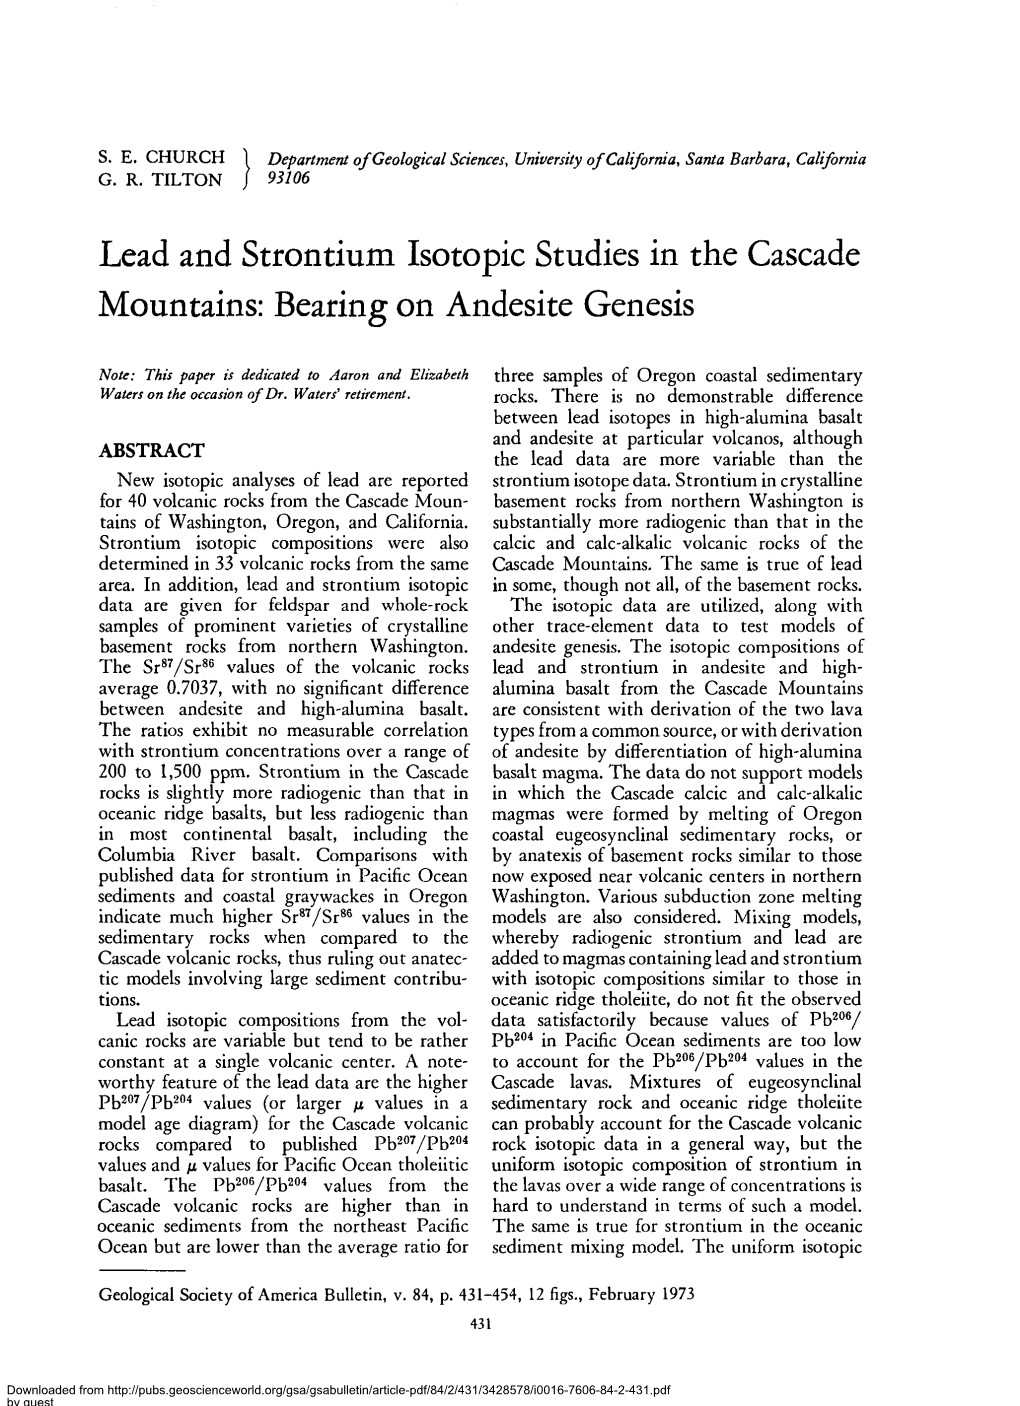 Lead and Strontium Isotopic Studies in the Cascade Mountains: Bearing on Andesite Genesis